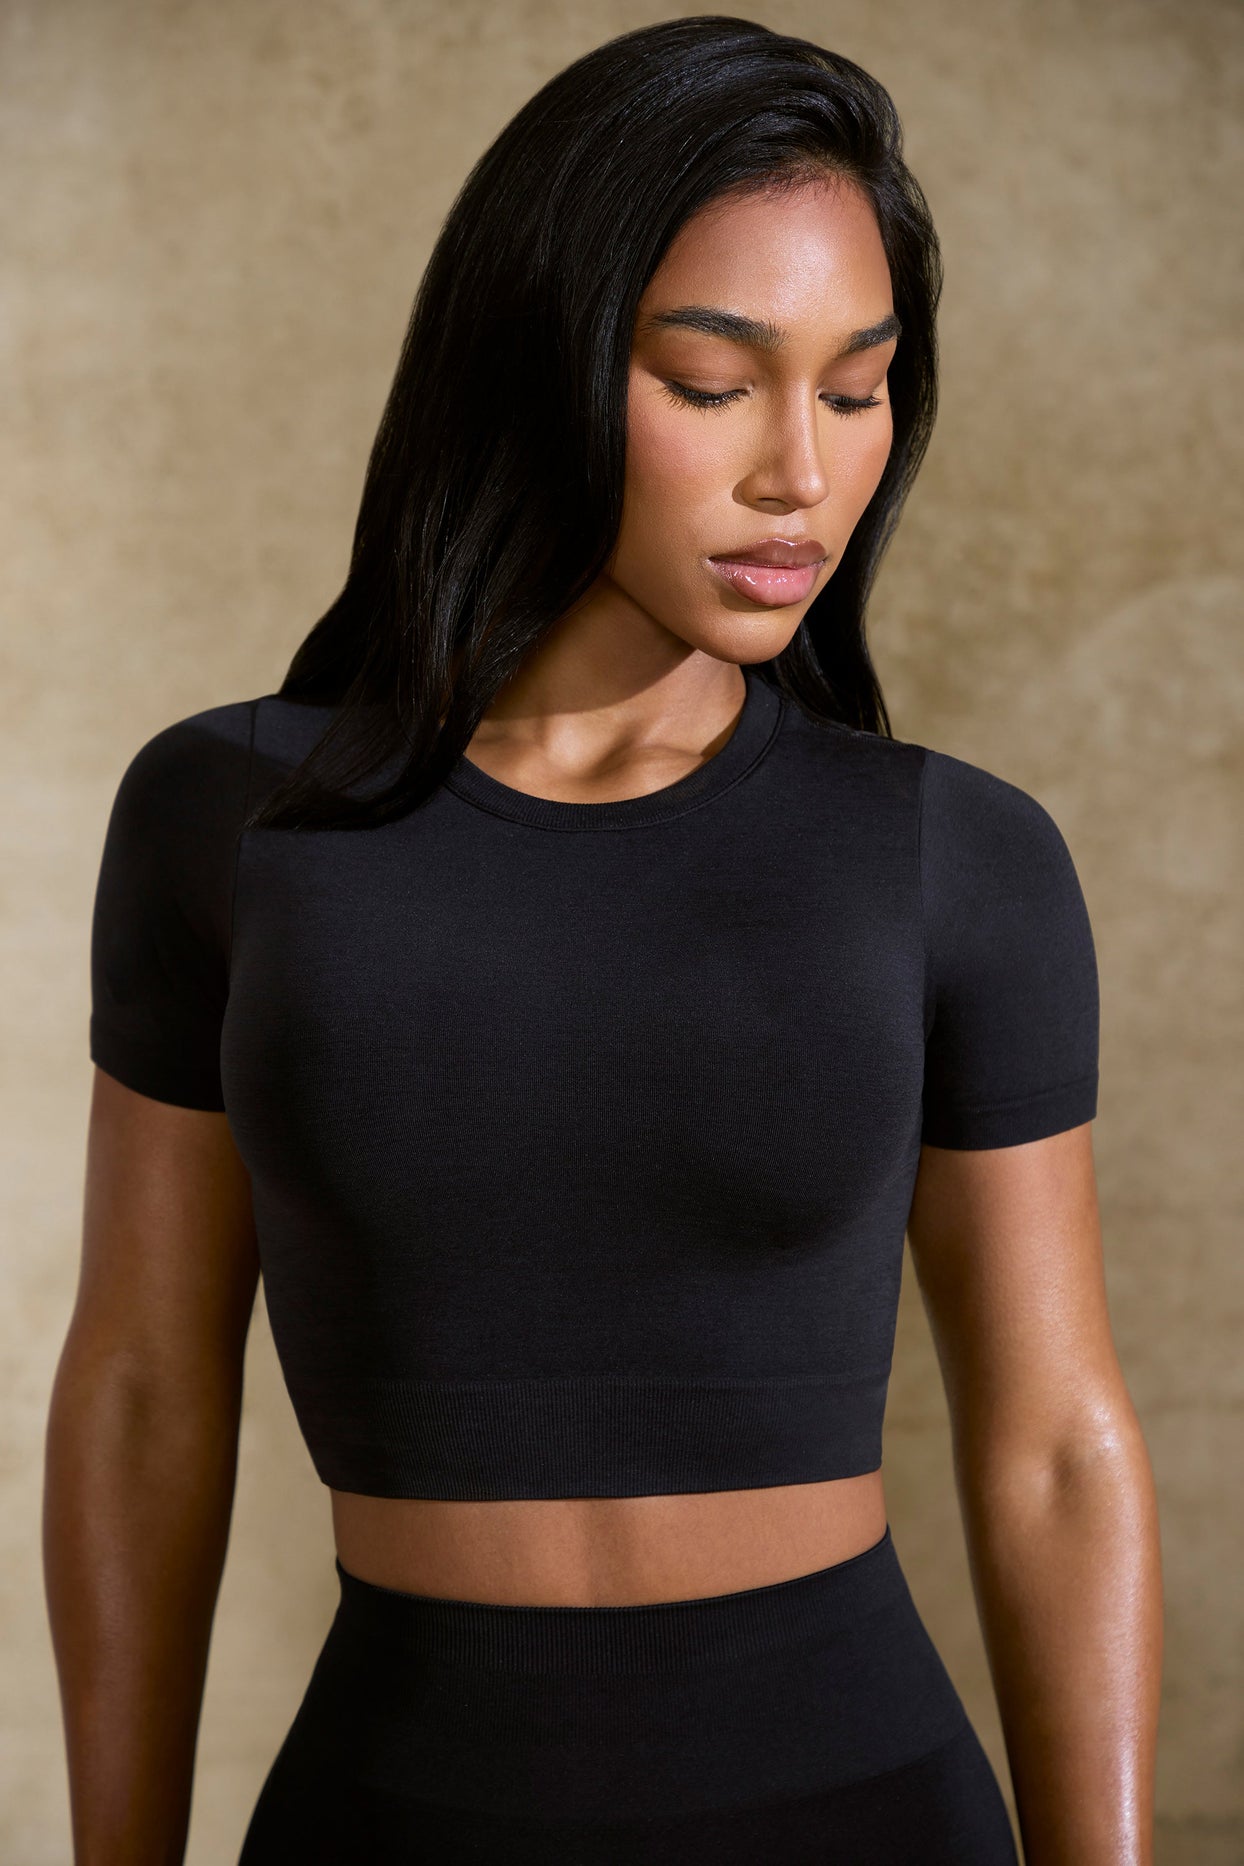 Excel Define Luxe Baby Tee Crop Top in Black | Oh Polly